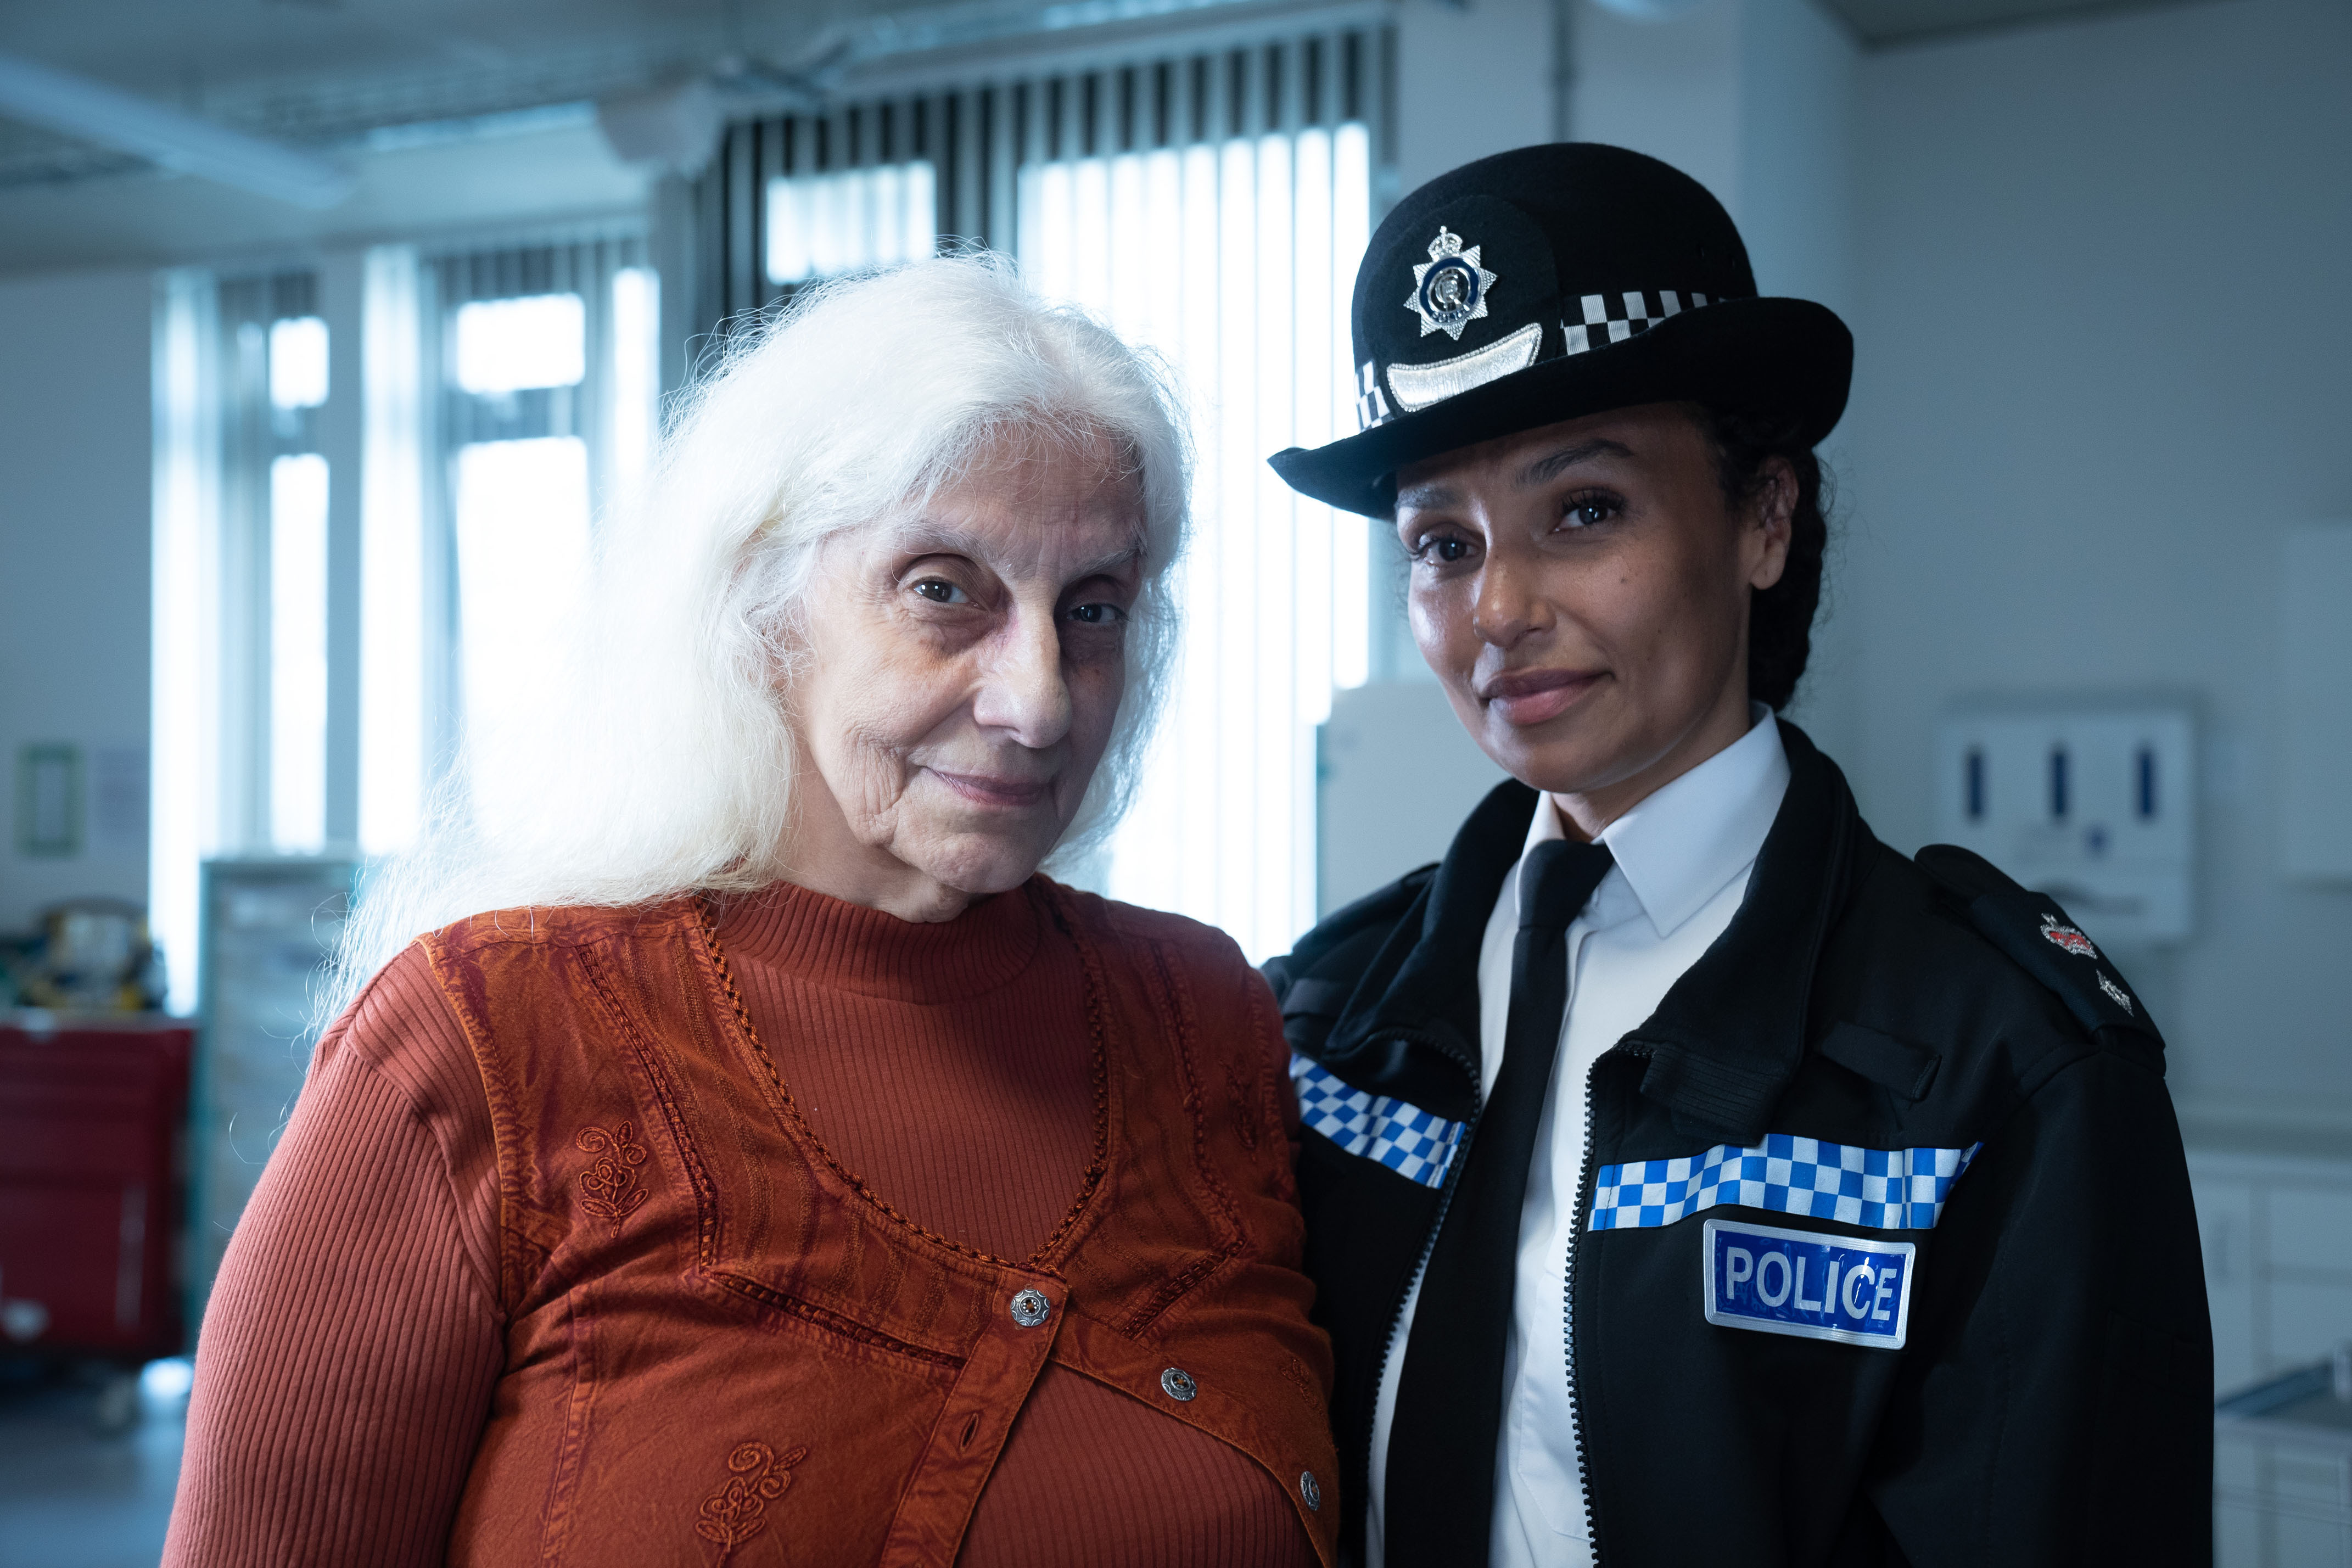 Ella (Souad Faress) stands with her granddaughter, Chief Superintendent Charlie Woods (Jade Harrison) in the hospital ward. Both are smiling faintly into the camera.